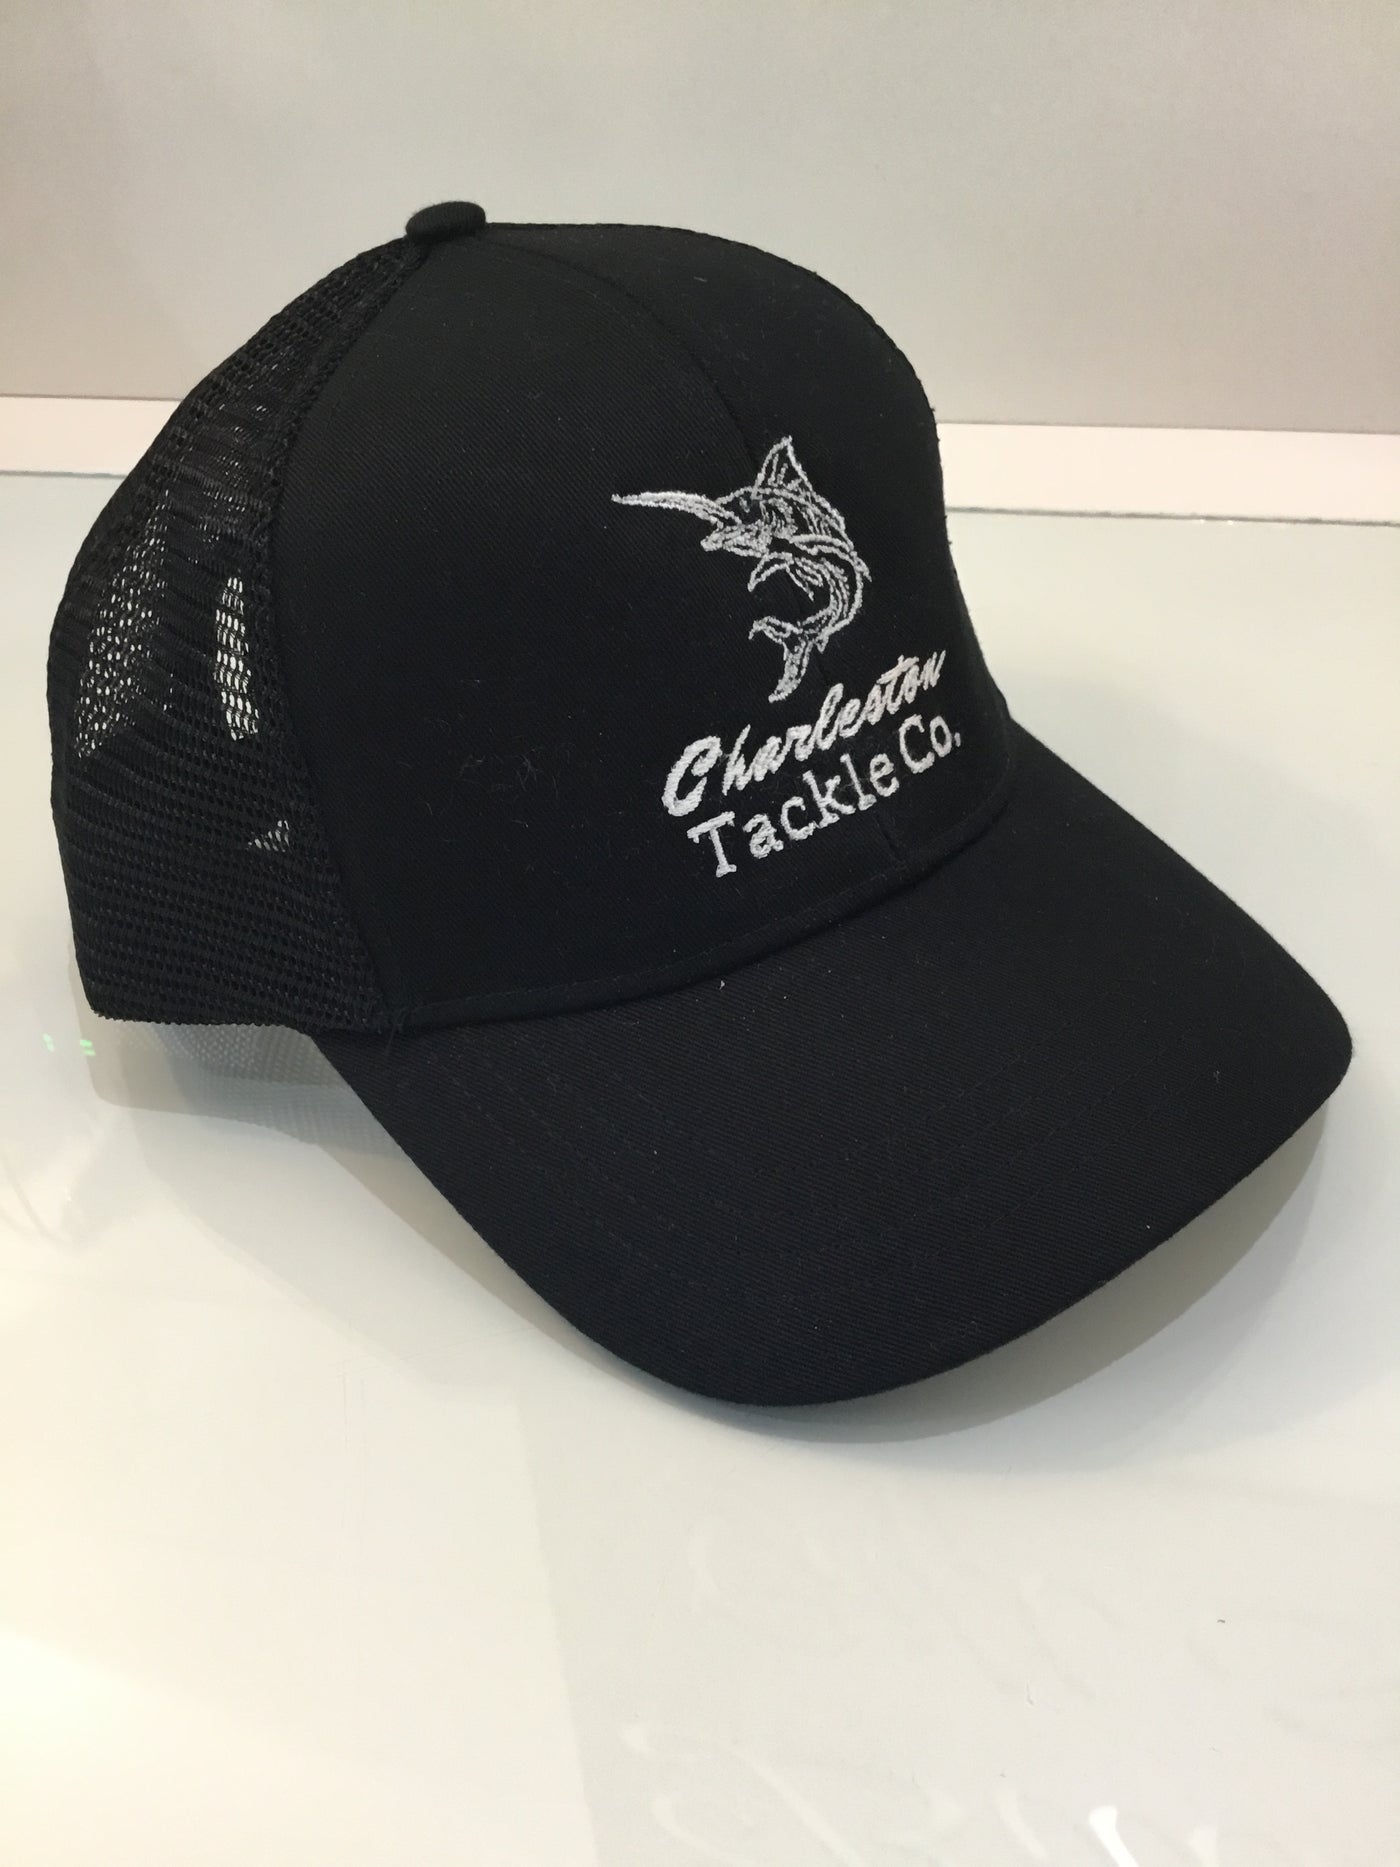 Embroidered Charleston Tackle Co. Trucker Hats